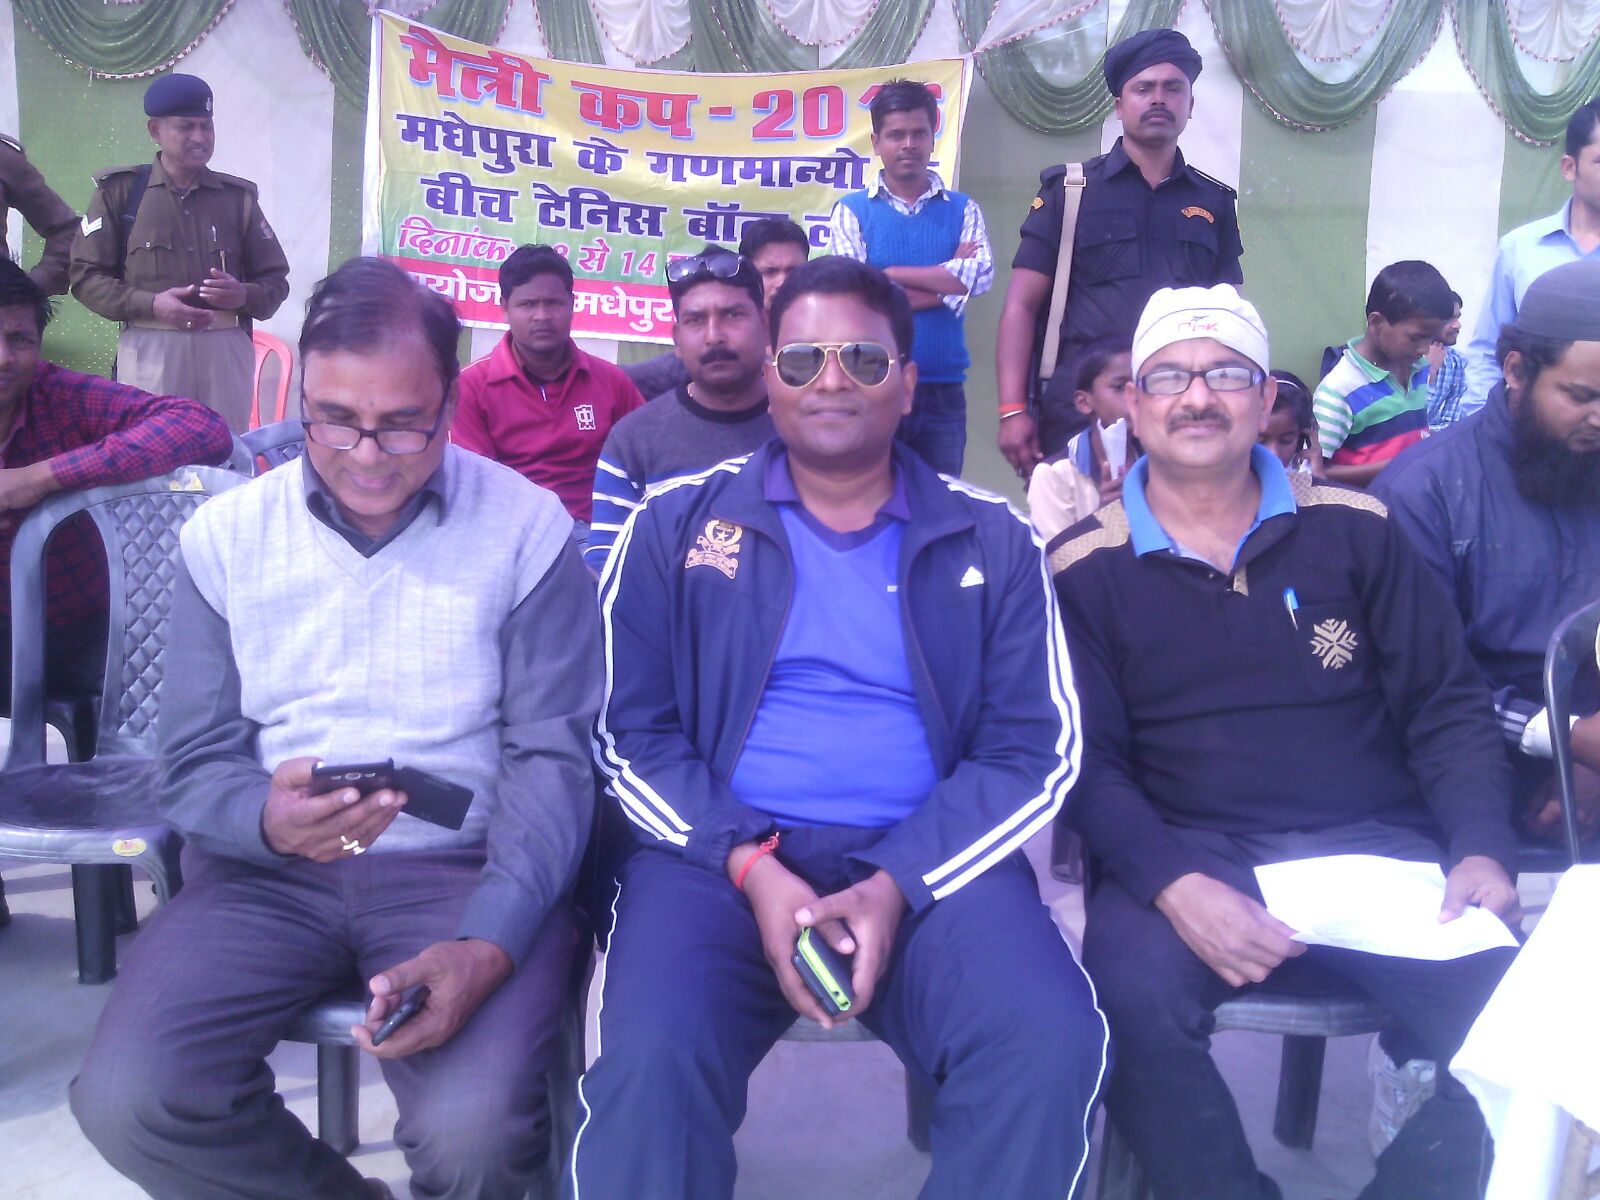 From Left to Right Dr.Madhepuri, S.P Kumar Ashish & Commentator Mahtab observing the final match of Maitri Cup Cricket Tournament at B.N.Mandal Stadium .